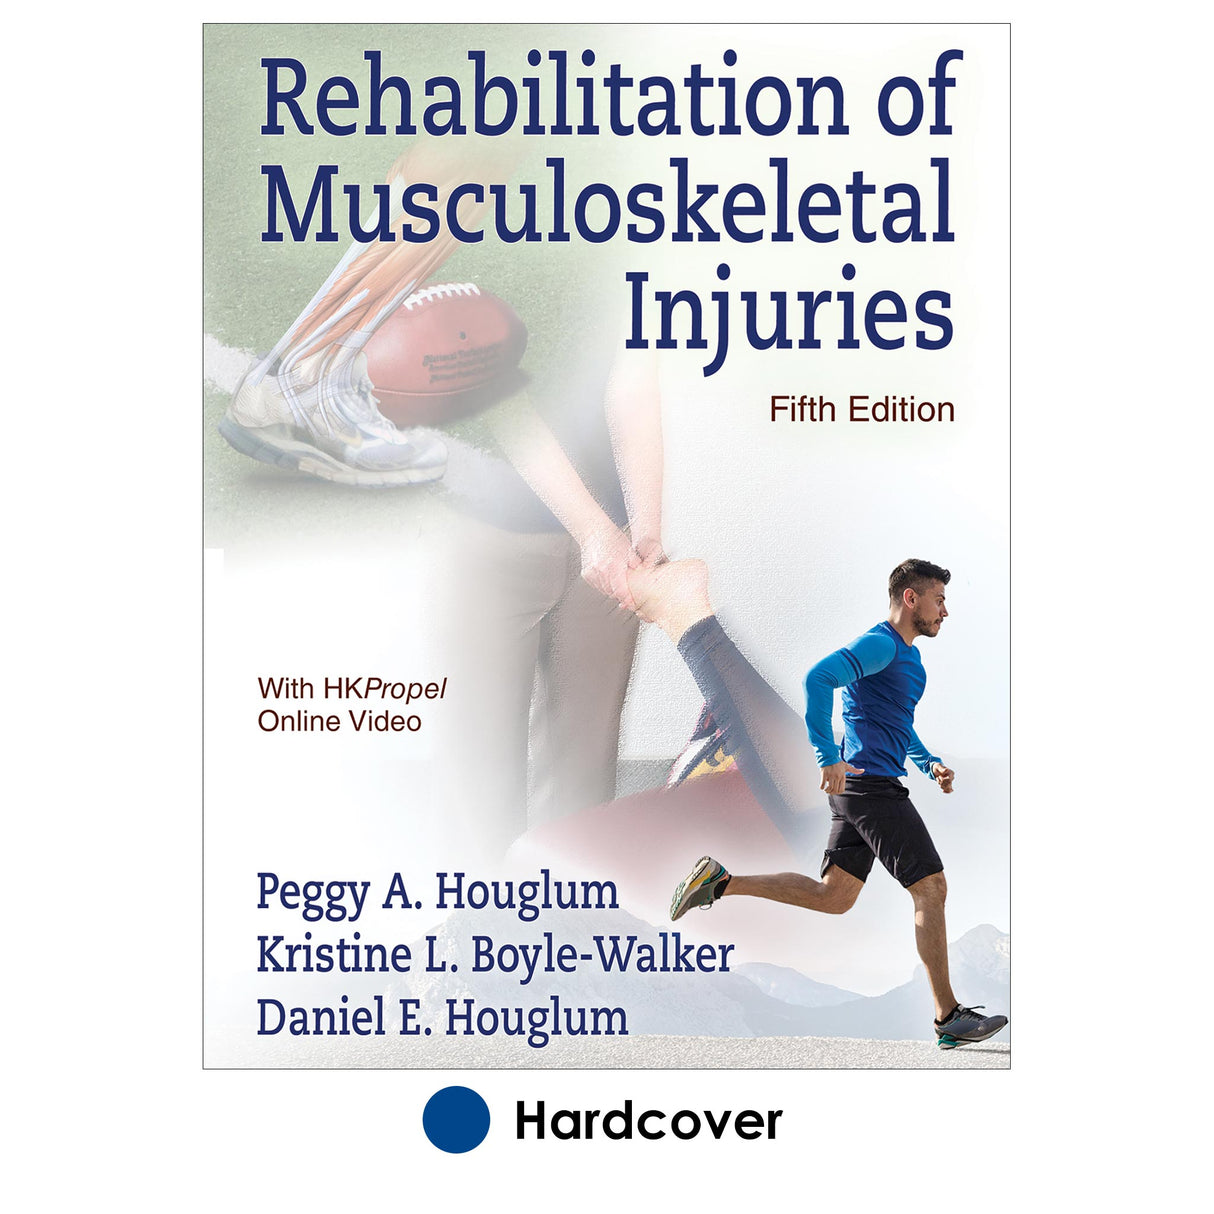 Rehabilitation of Musculoskeletal Injuries 5th Edition With HKPropel Online Video